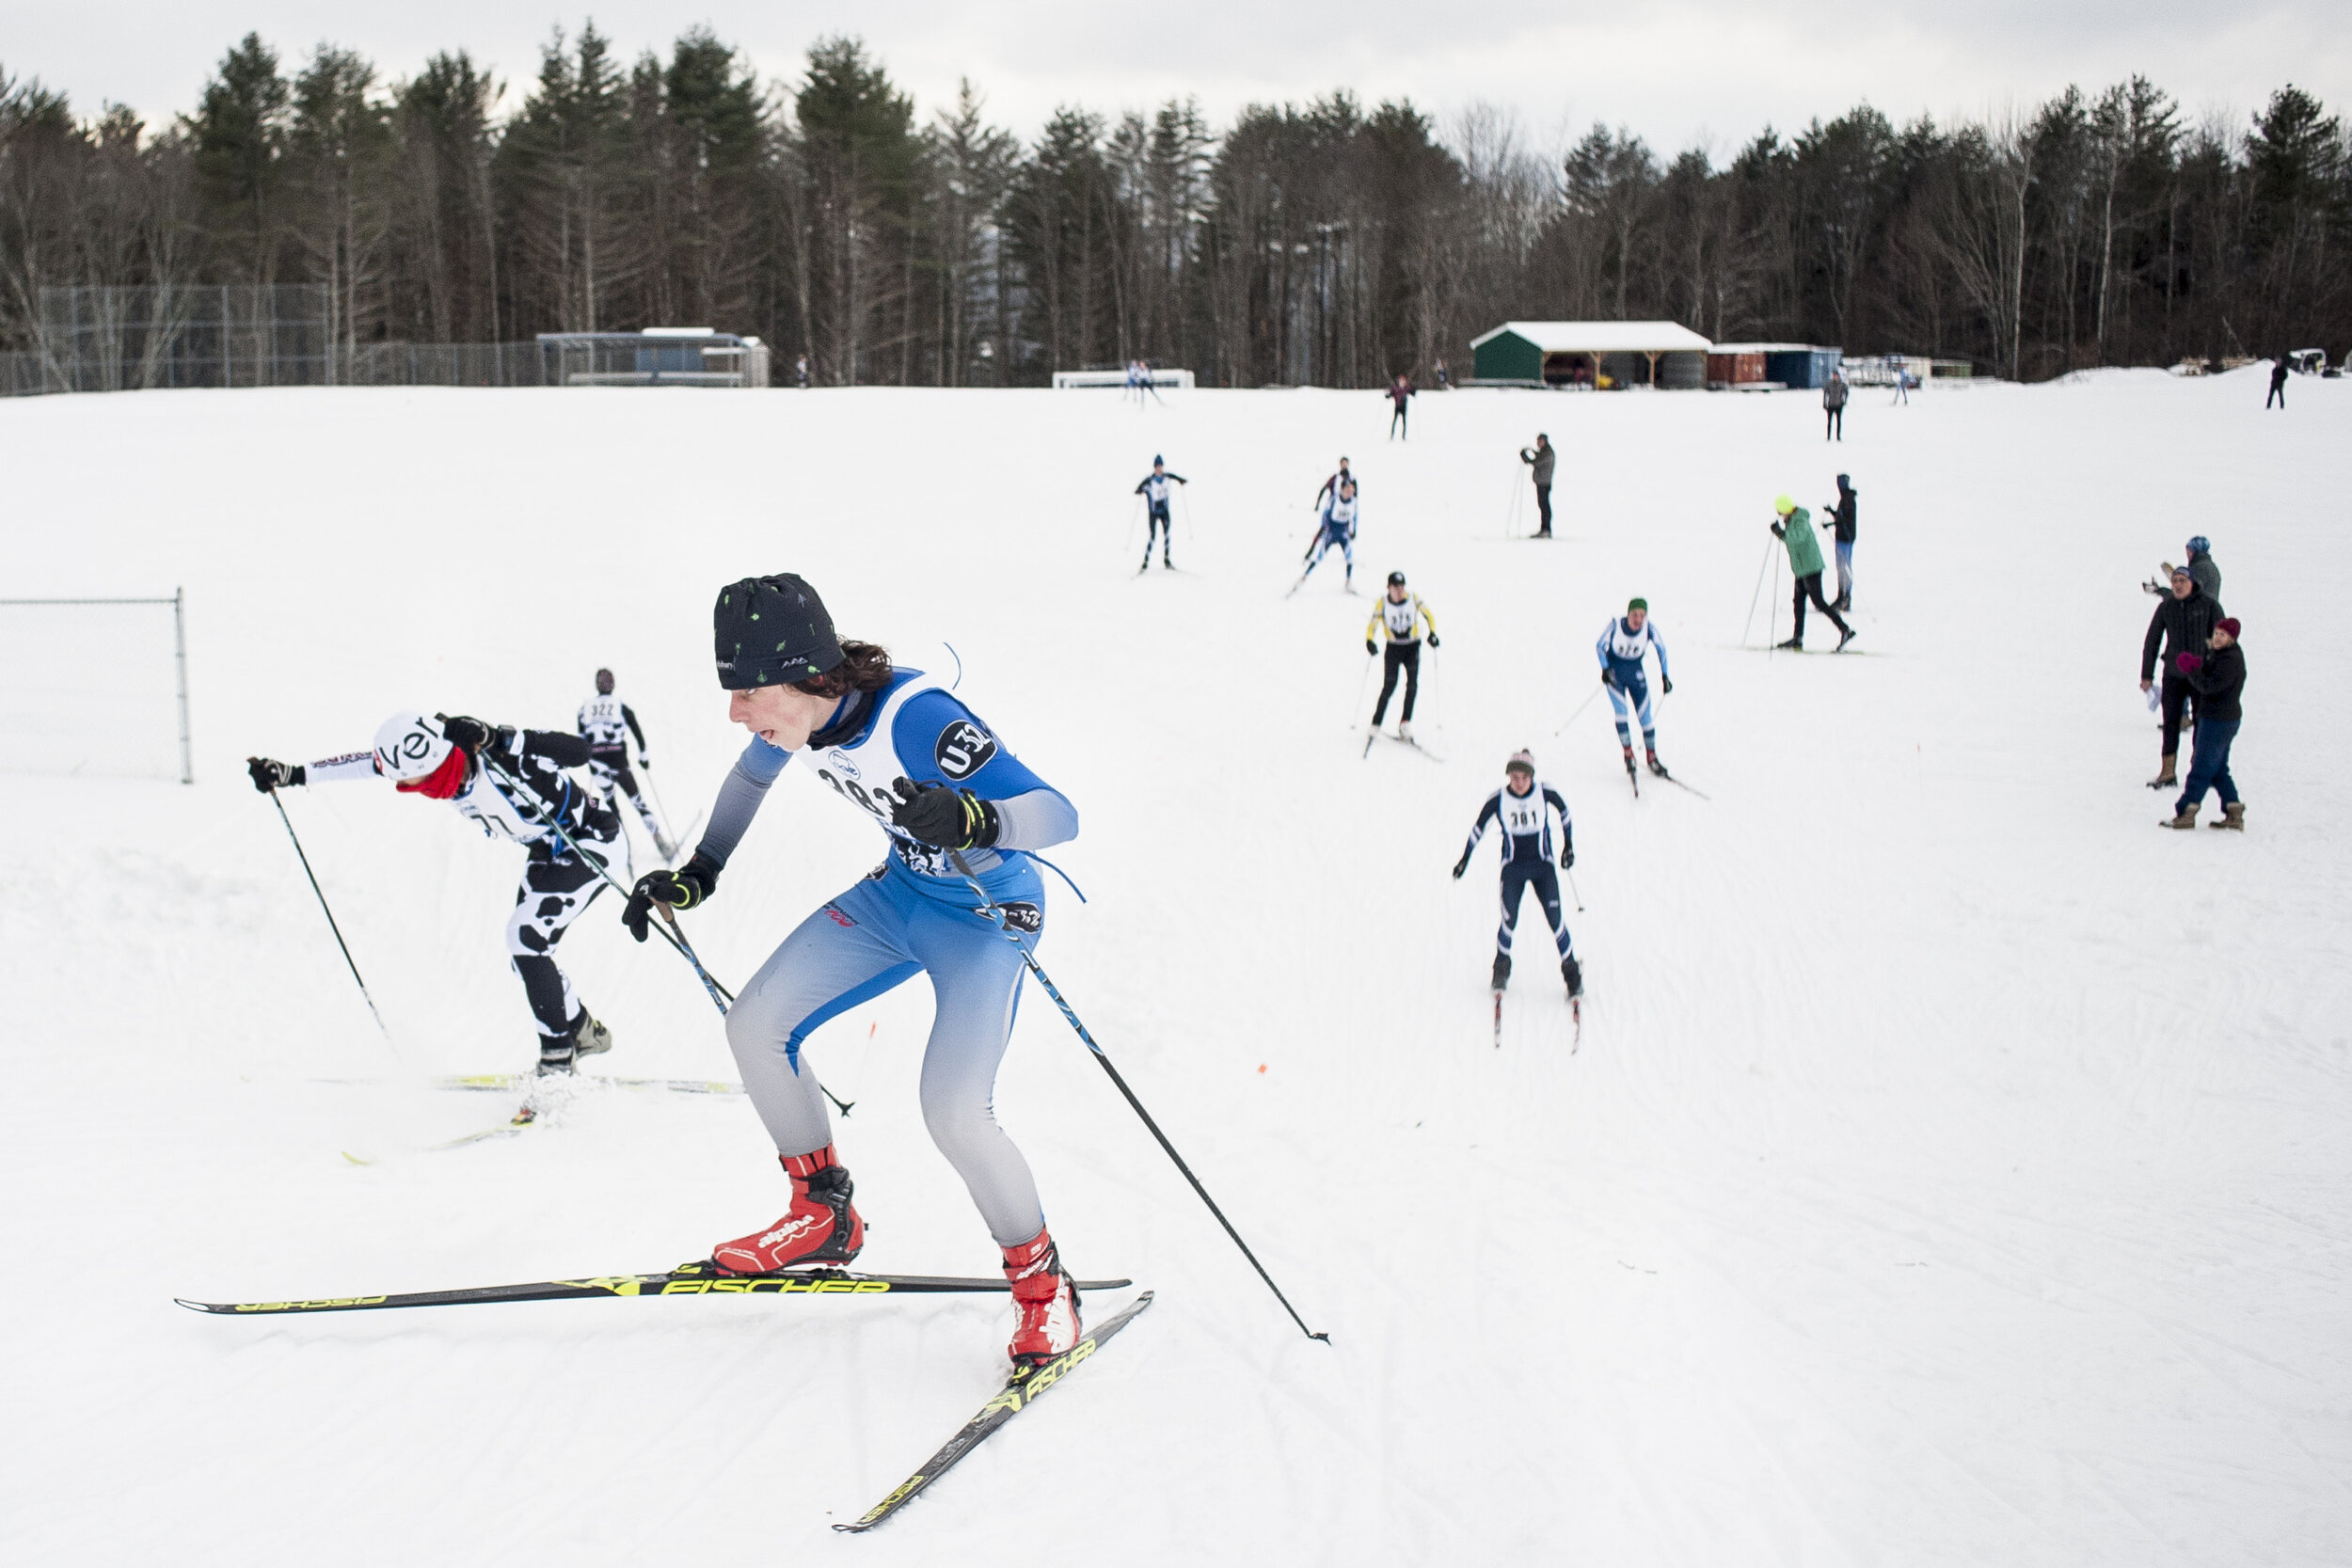  Varisty skiers scale an uphill section of the course on Tuesday, January 16th 2018 at U-32 Middle &amp; High School in Montpelier, VT.     